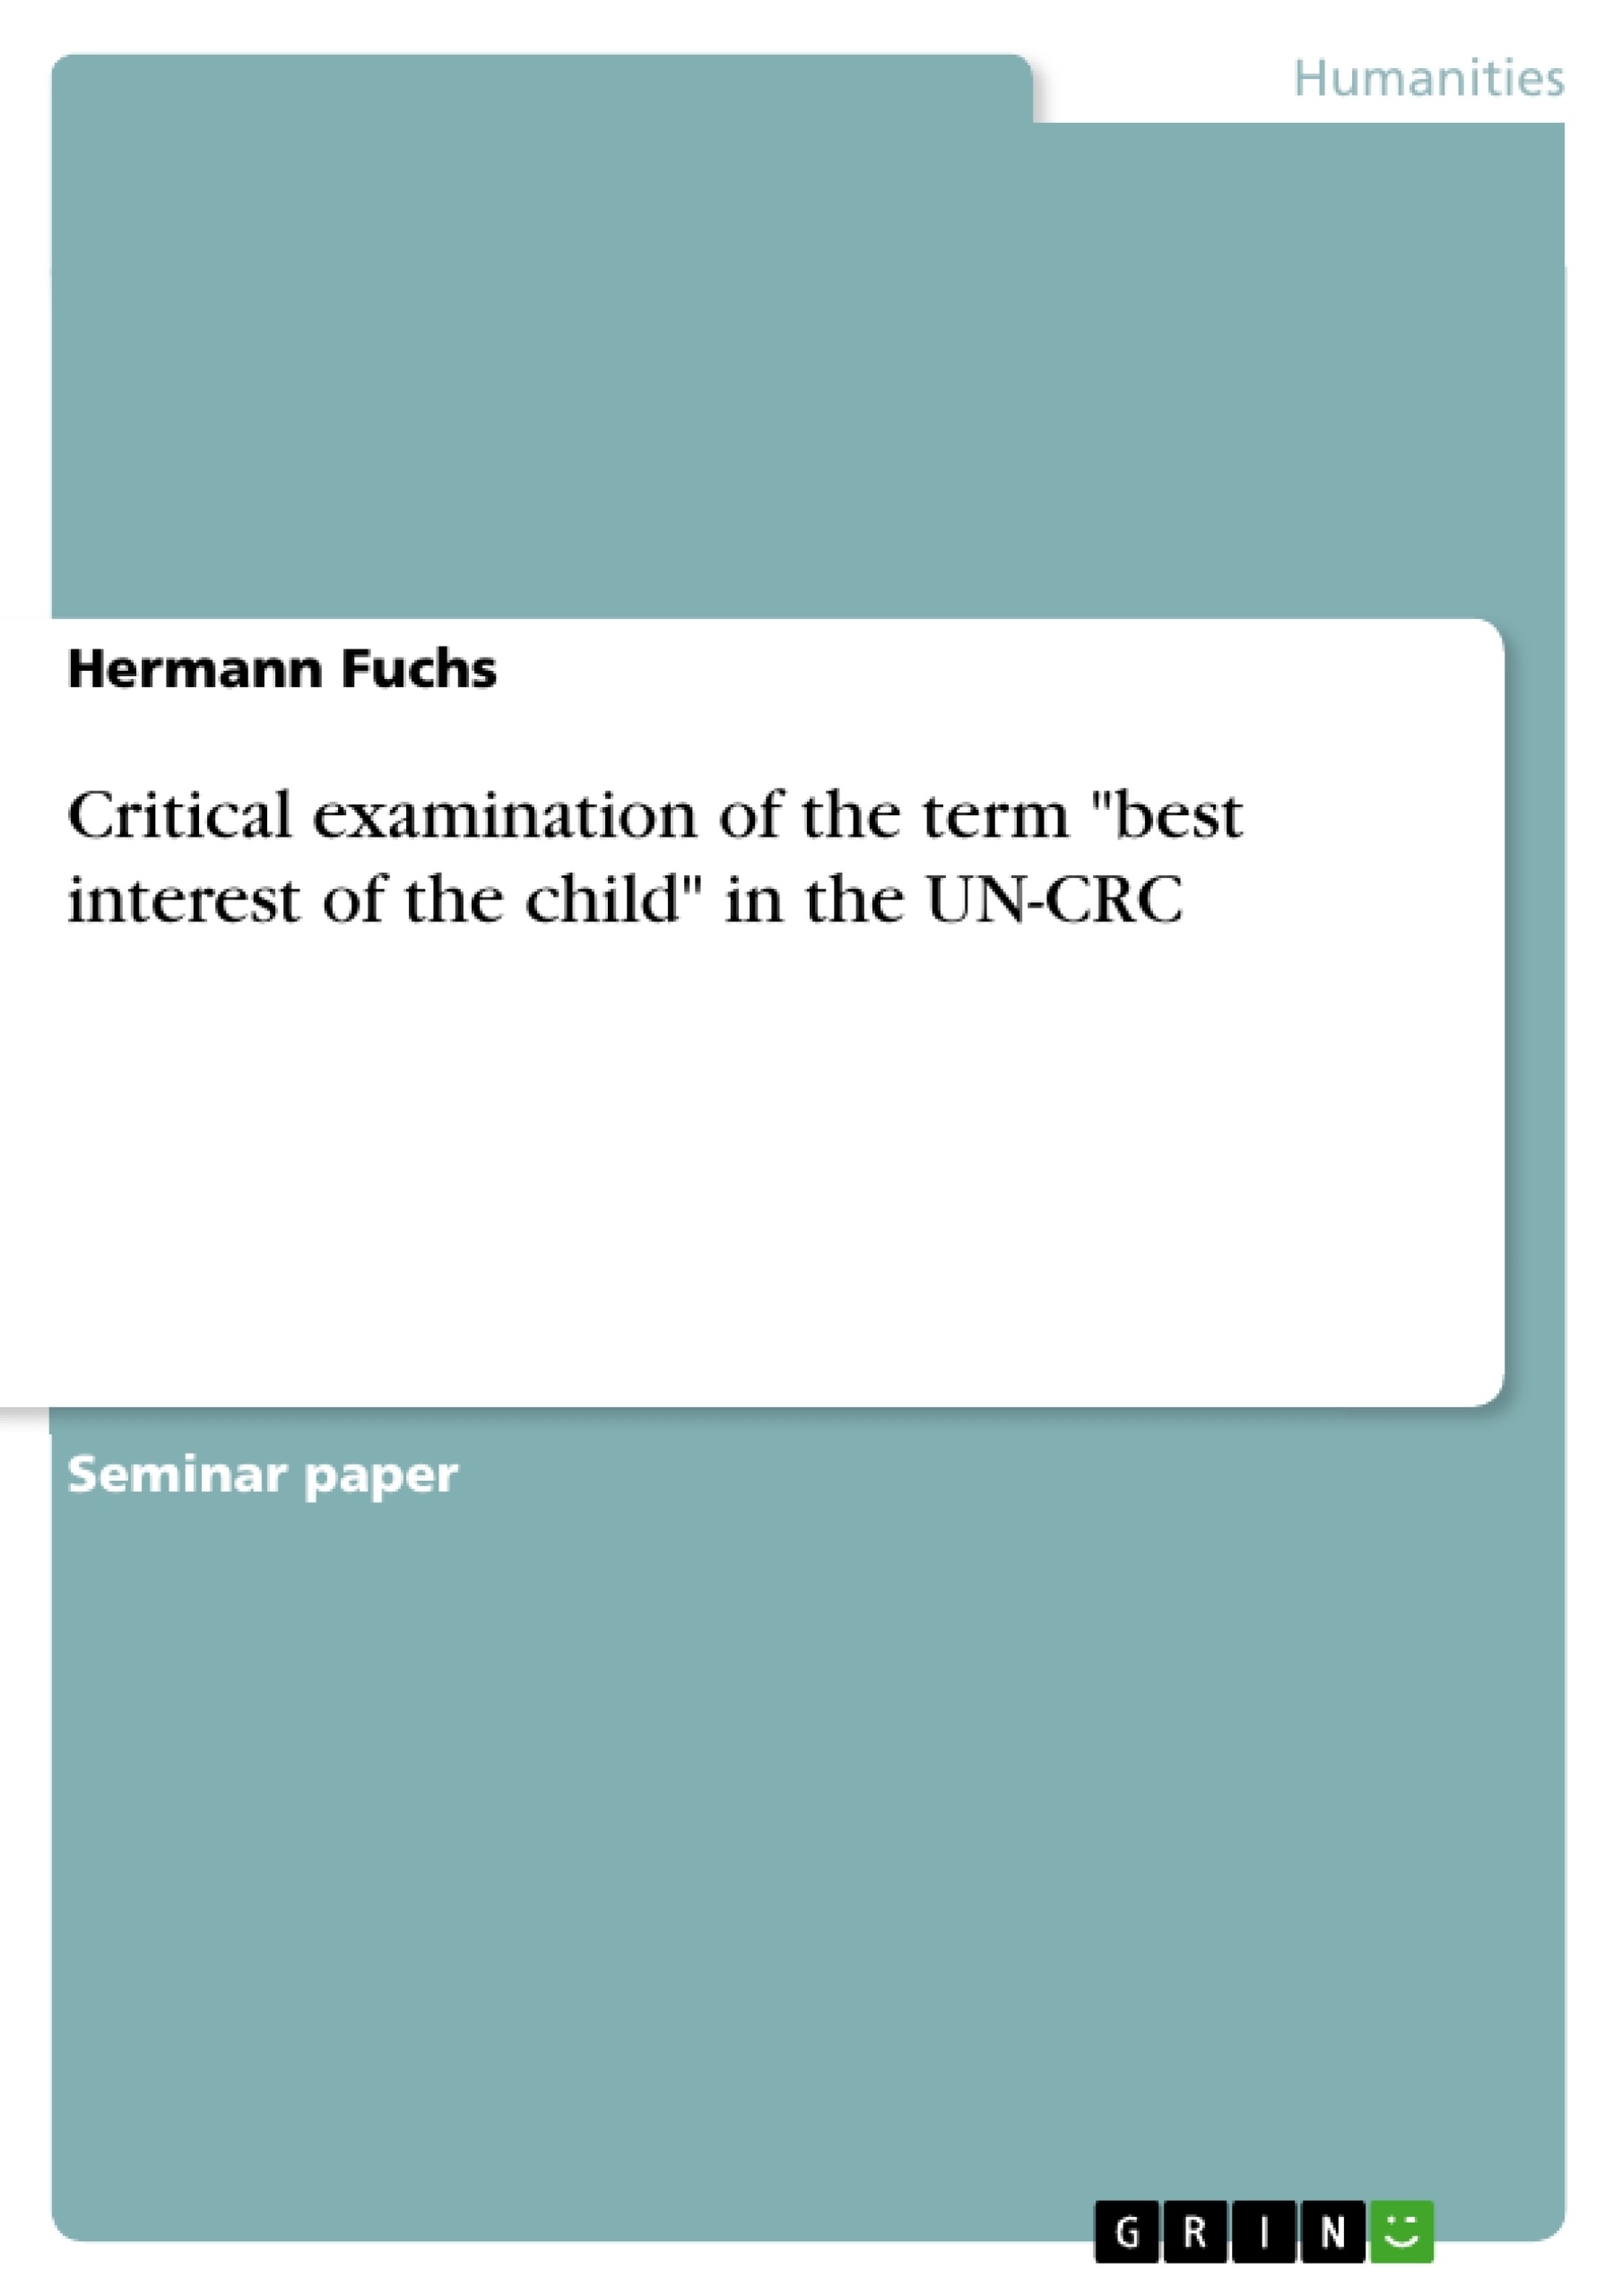 Titre: Critical examination of the term "best interest of the child" in the UN-CRC